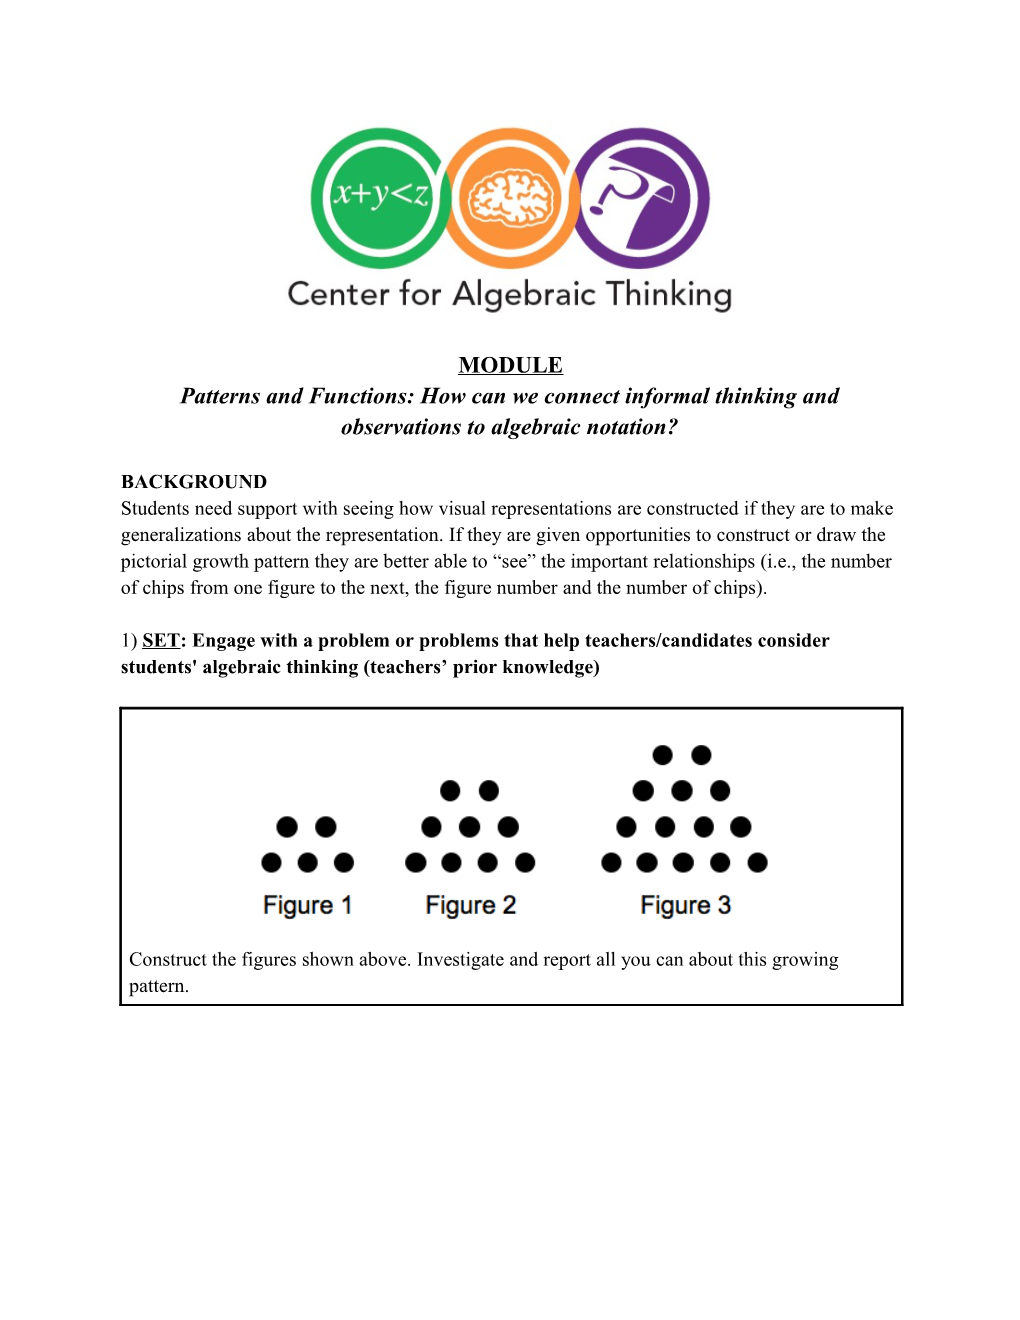 Patterns and Functions: How Can We Connect Informal Thinking and Observations to Algebraic